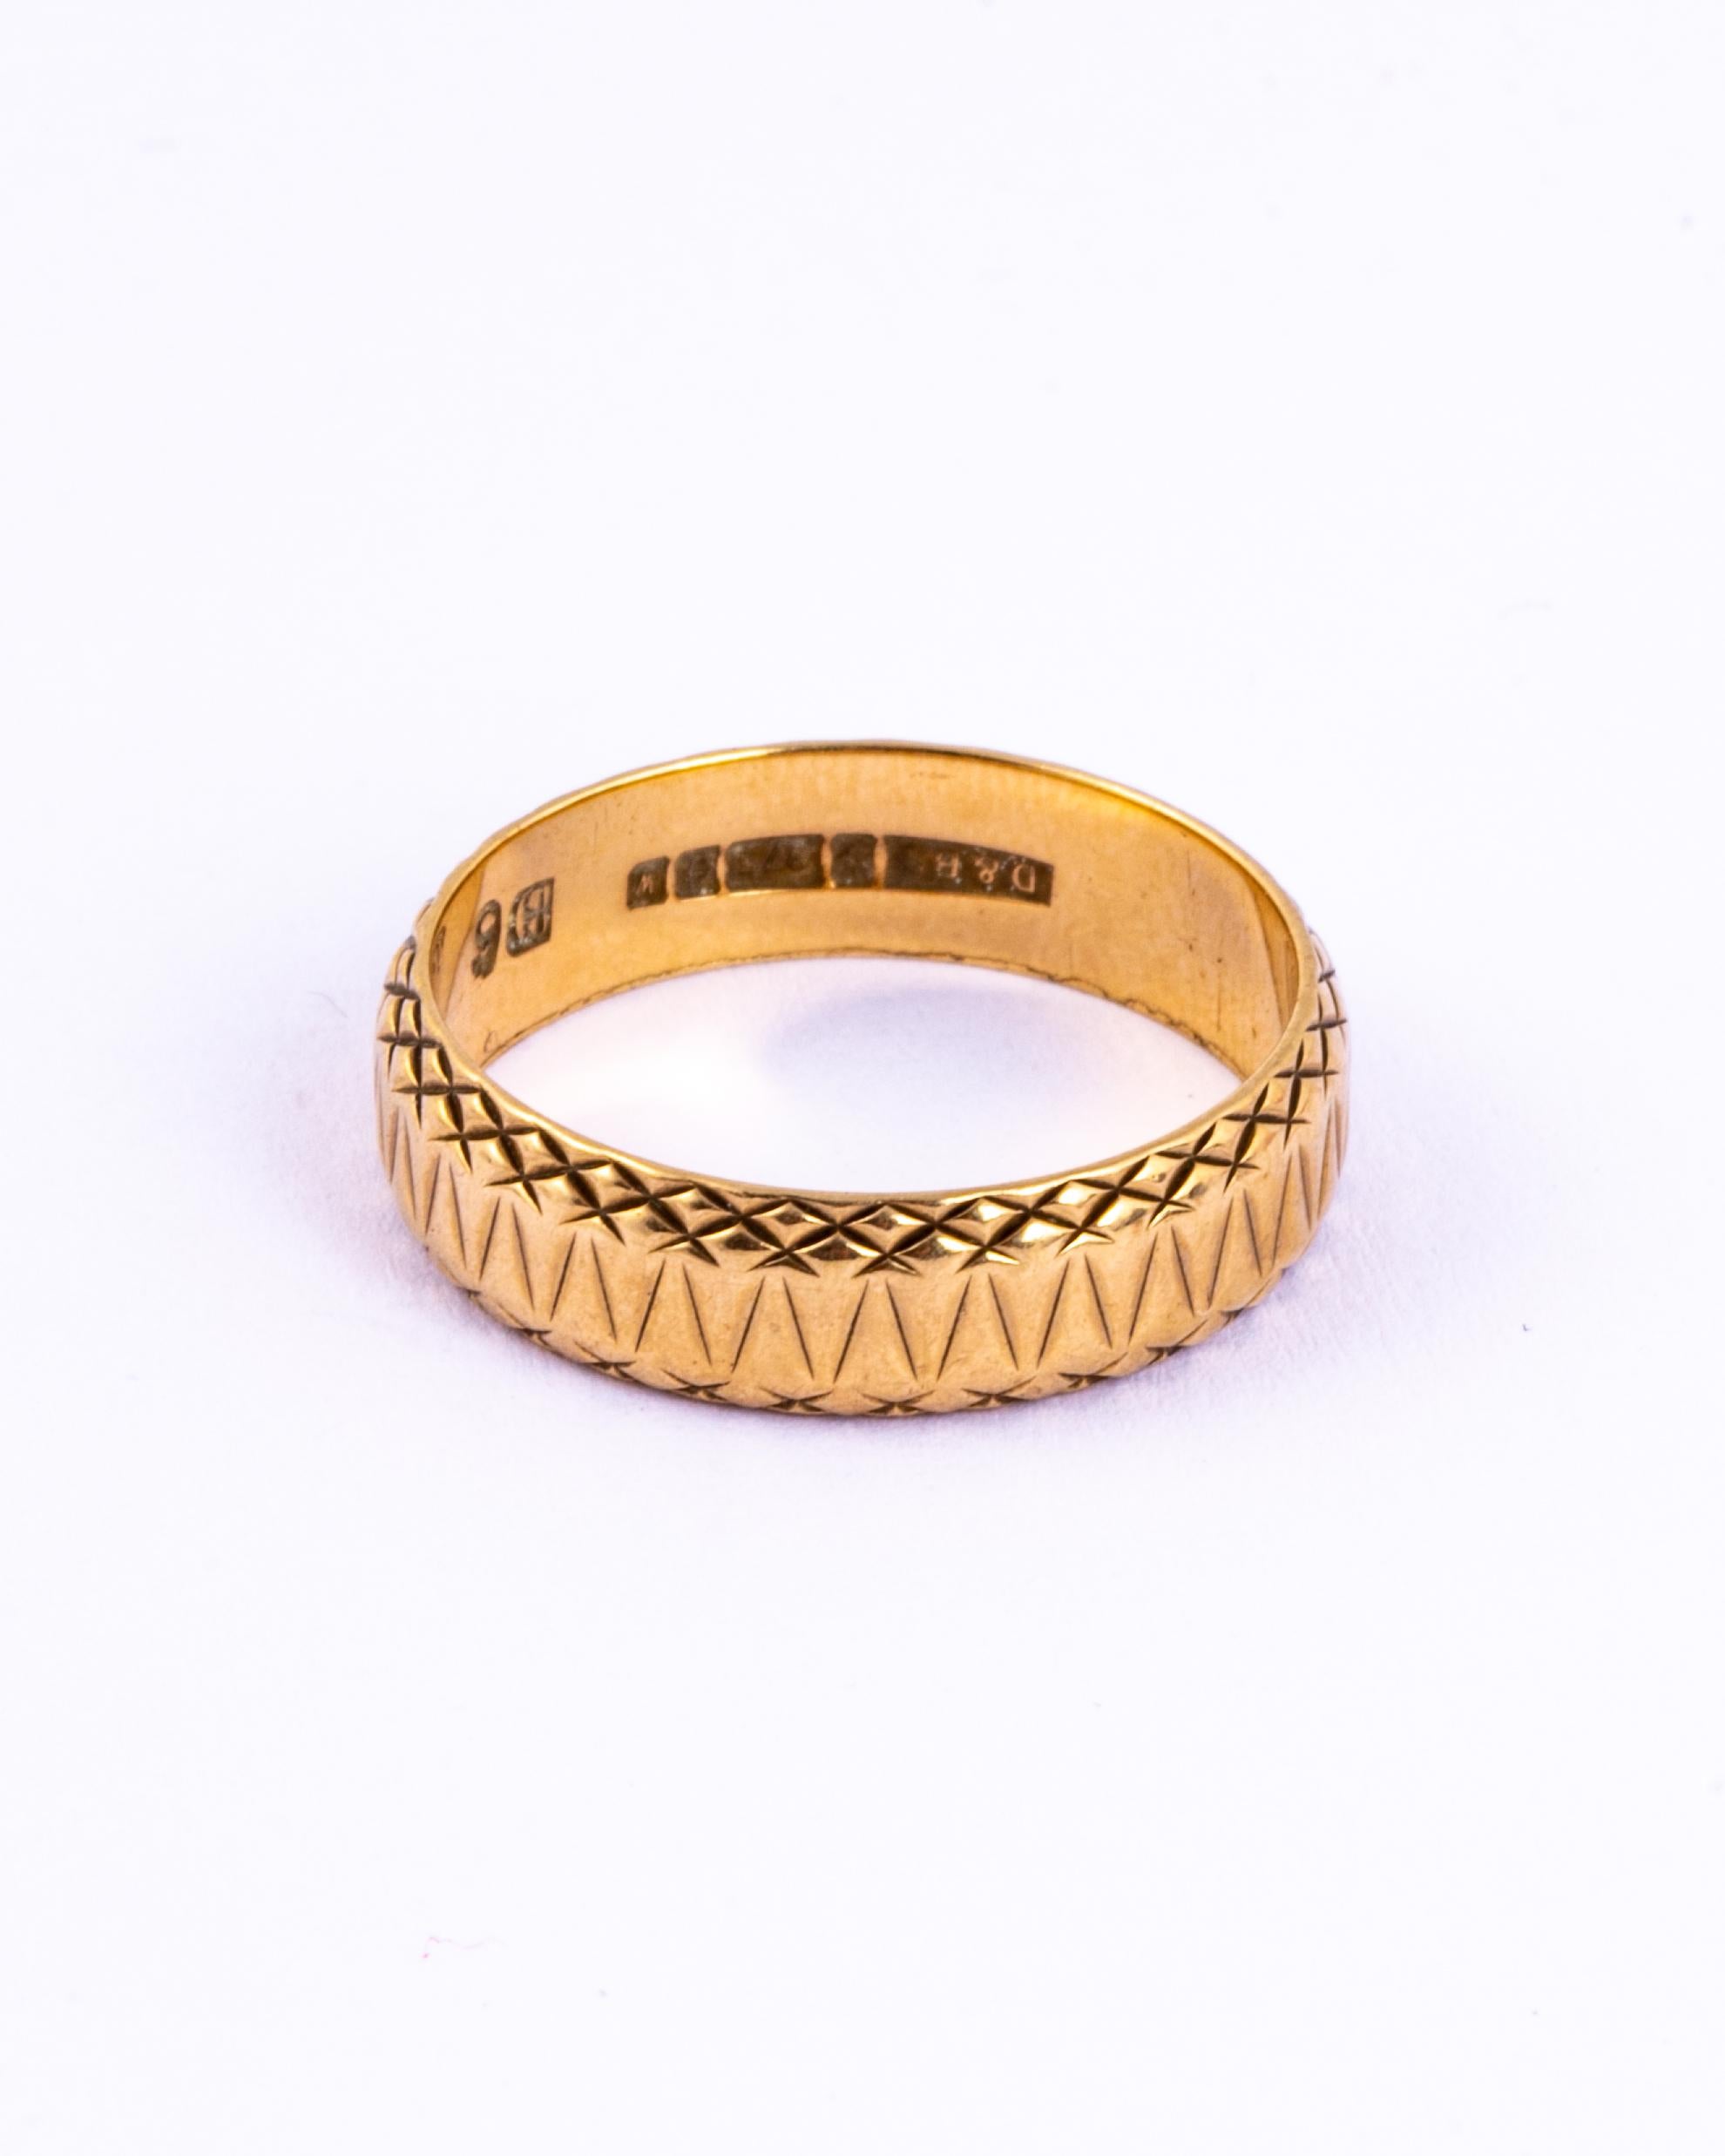 The design engraved beautifully into this 9ct gold band is full of detail. This would make a great fancy wedding band or an ornate everyday ring. Made in Birmingham, England.

Size: Q 1/2 or 8 1/4 
Band Width: 5.5mm

Weight: 3.9g